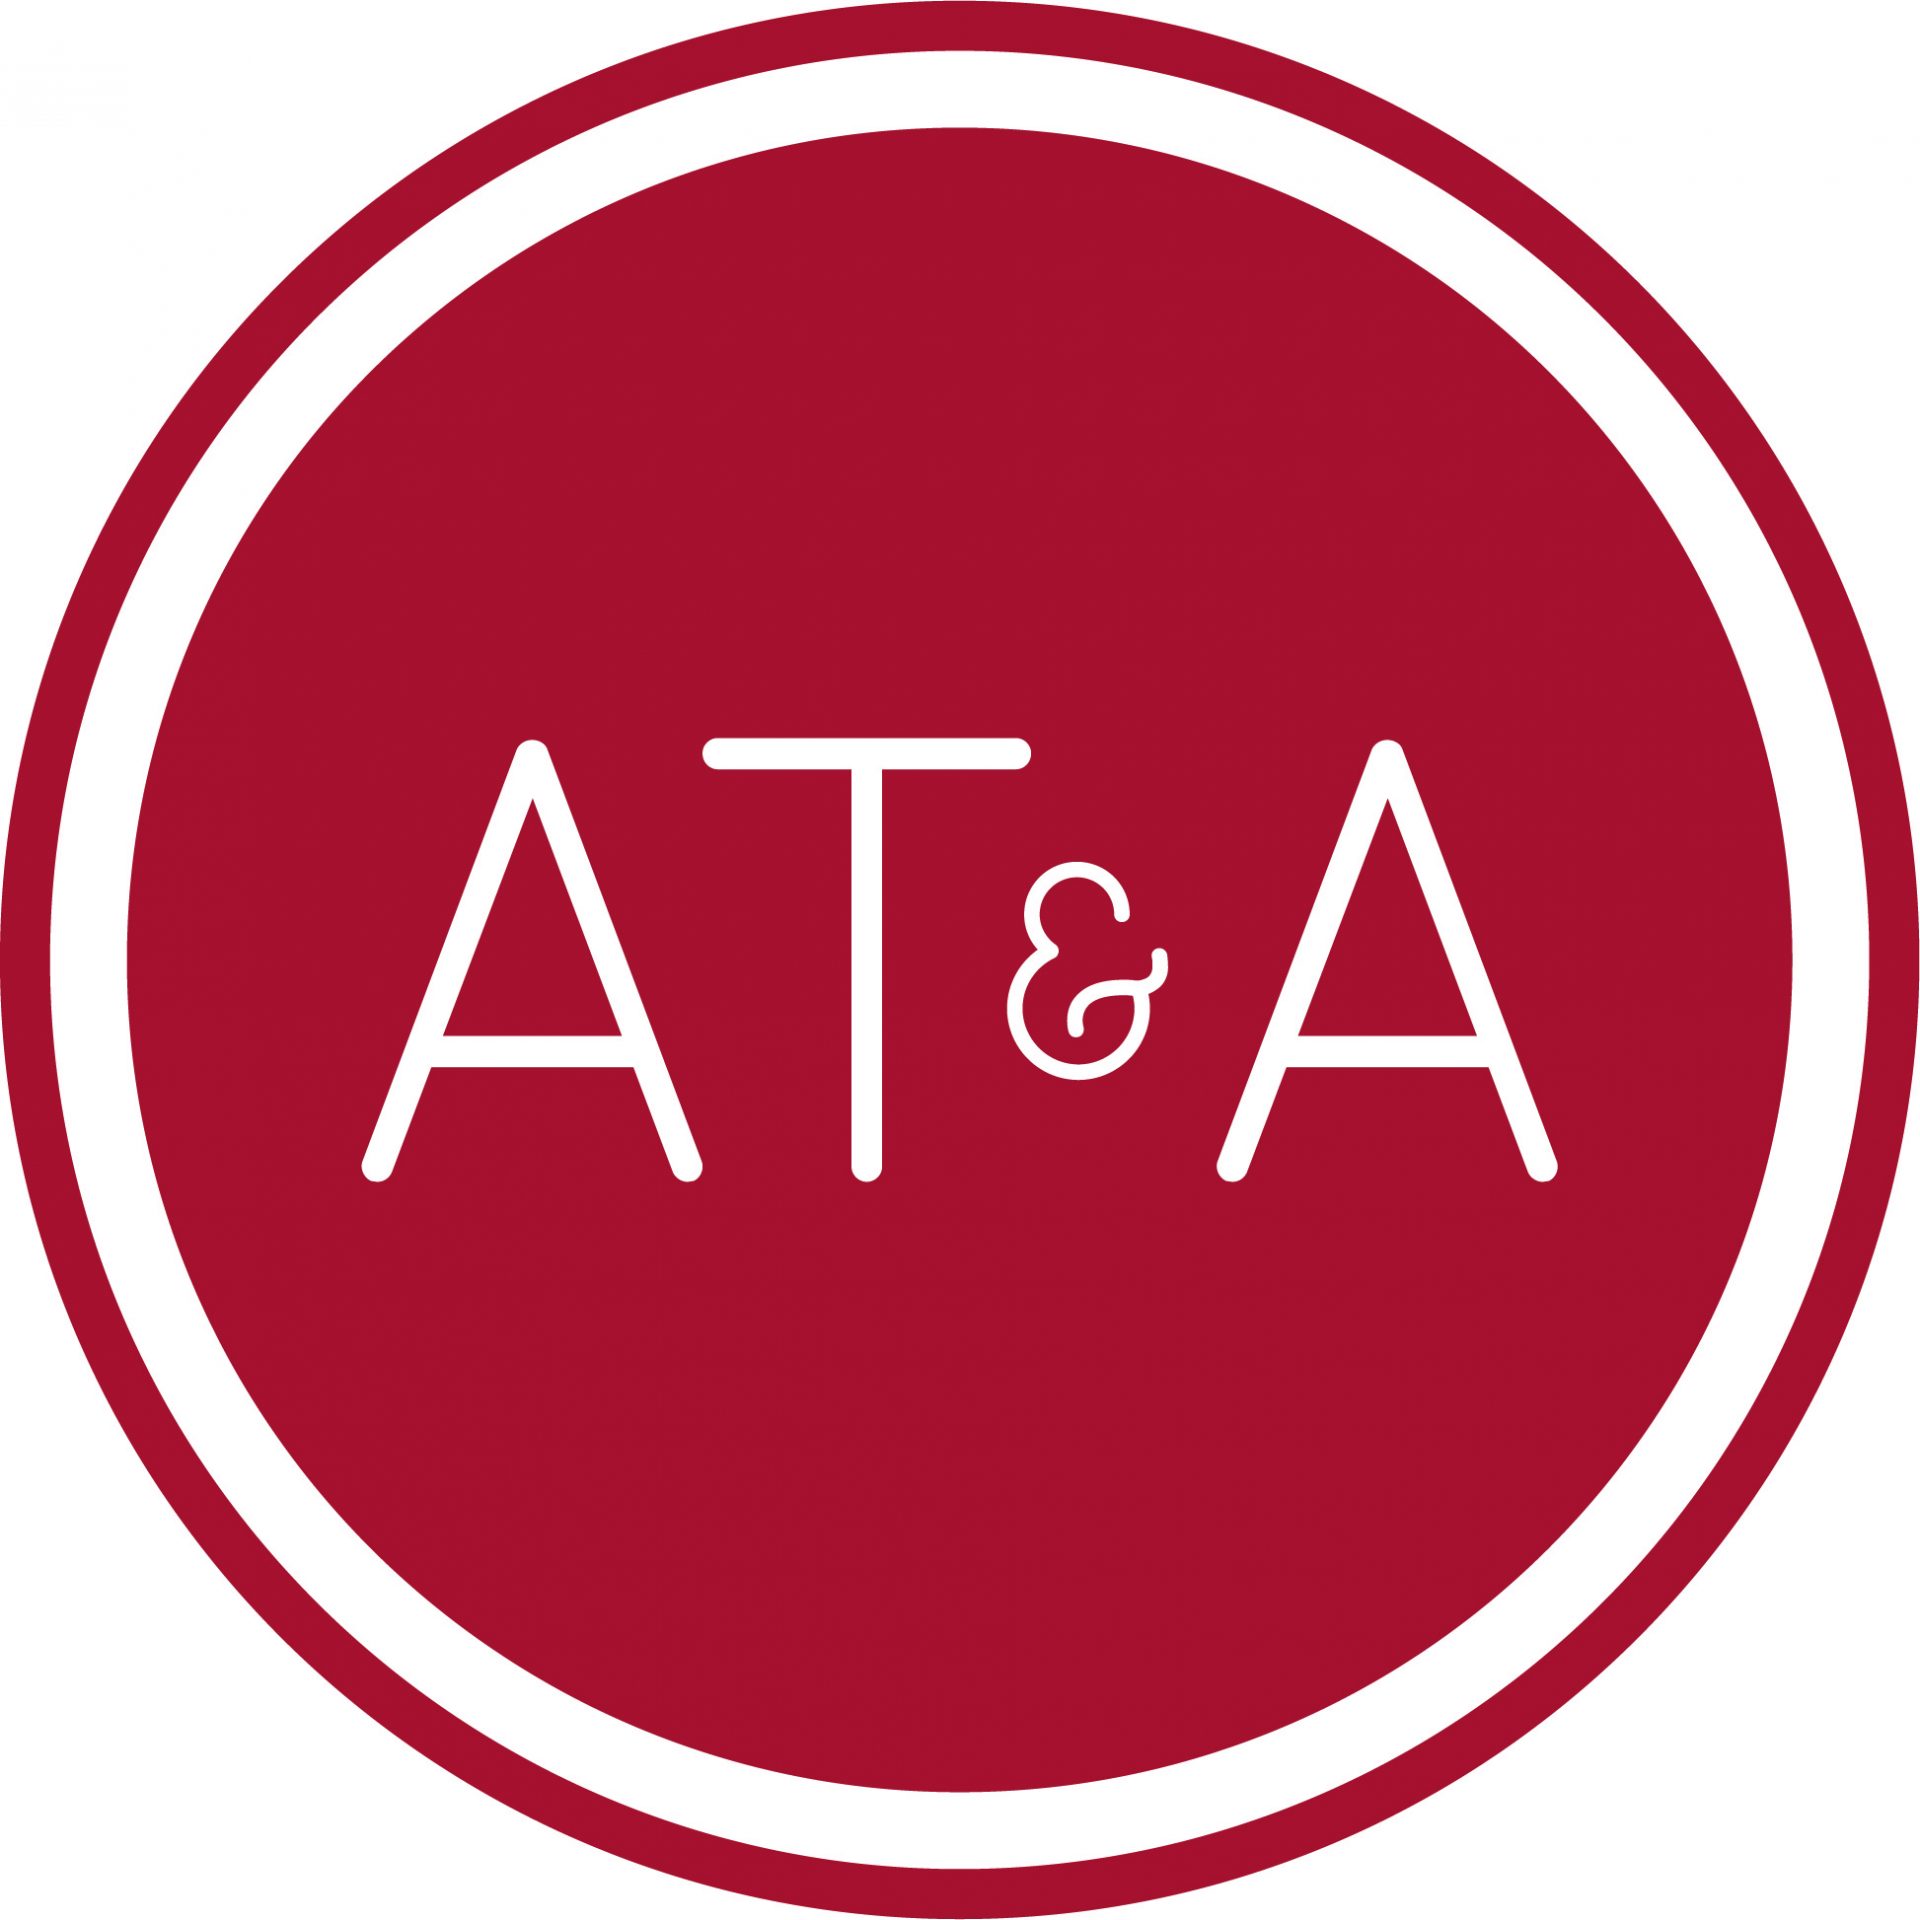 A T & A - A Local Commercial Insurance Broker you can Trust